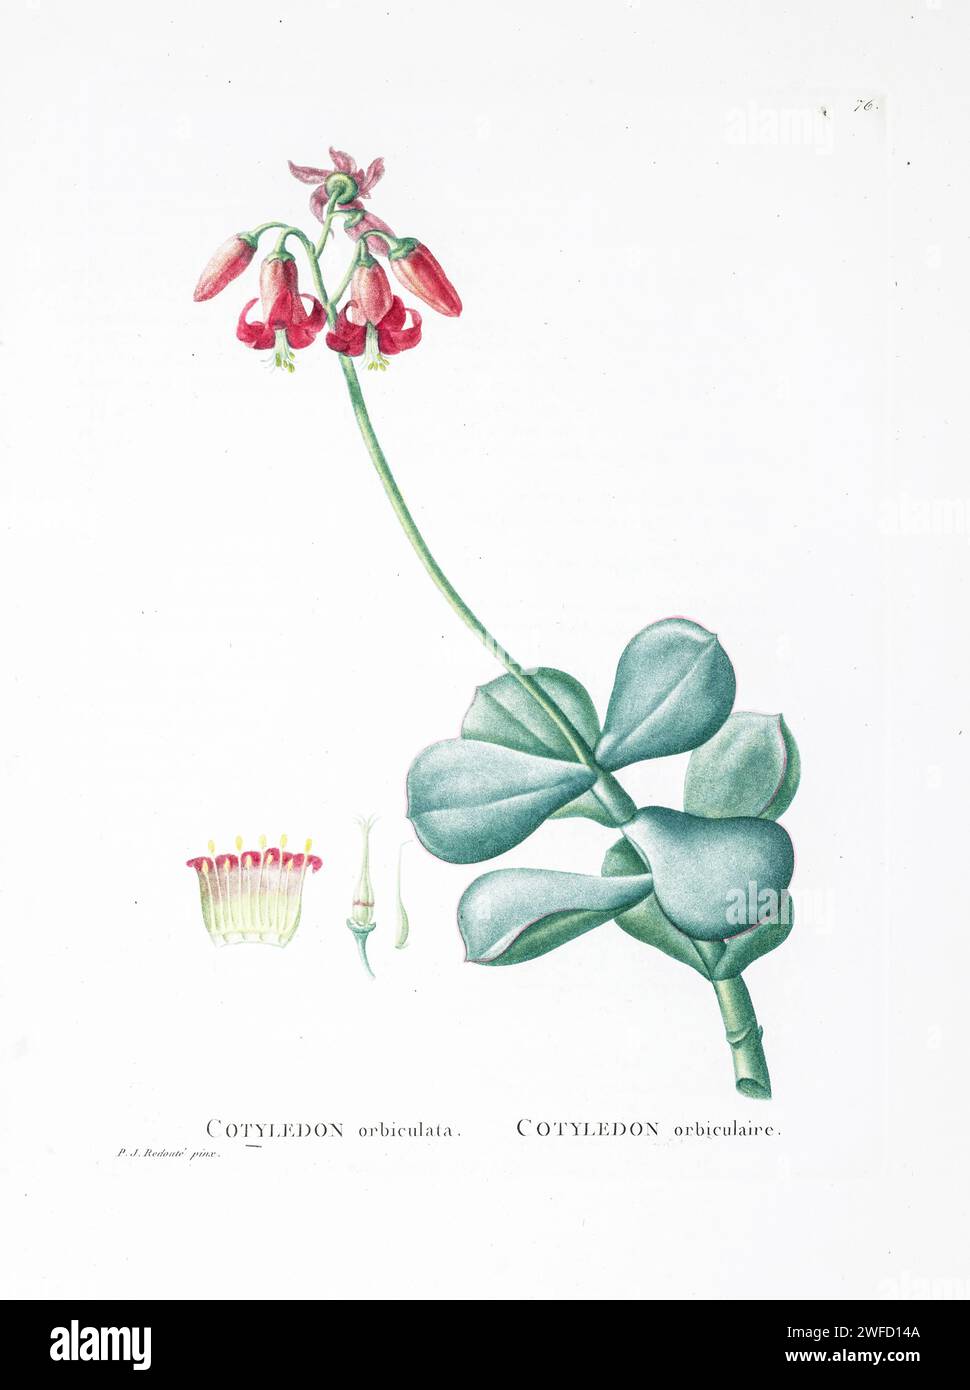 Cotyledon orbiculata from History of Succulent Plants [Plantarum historia succulentarum / Histoire des plantes grasses] painted by Pierre-Joseph Redouté and described by Augustin Pyramus de Candolle 1799 Cotyledon orbiculata, commonly known as pig's ear or round-leafed navel-wort, is a South African succulent plant belonging to the genus Cotyledon. Stock Photo